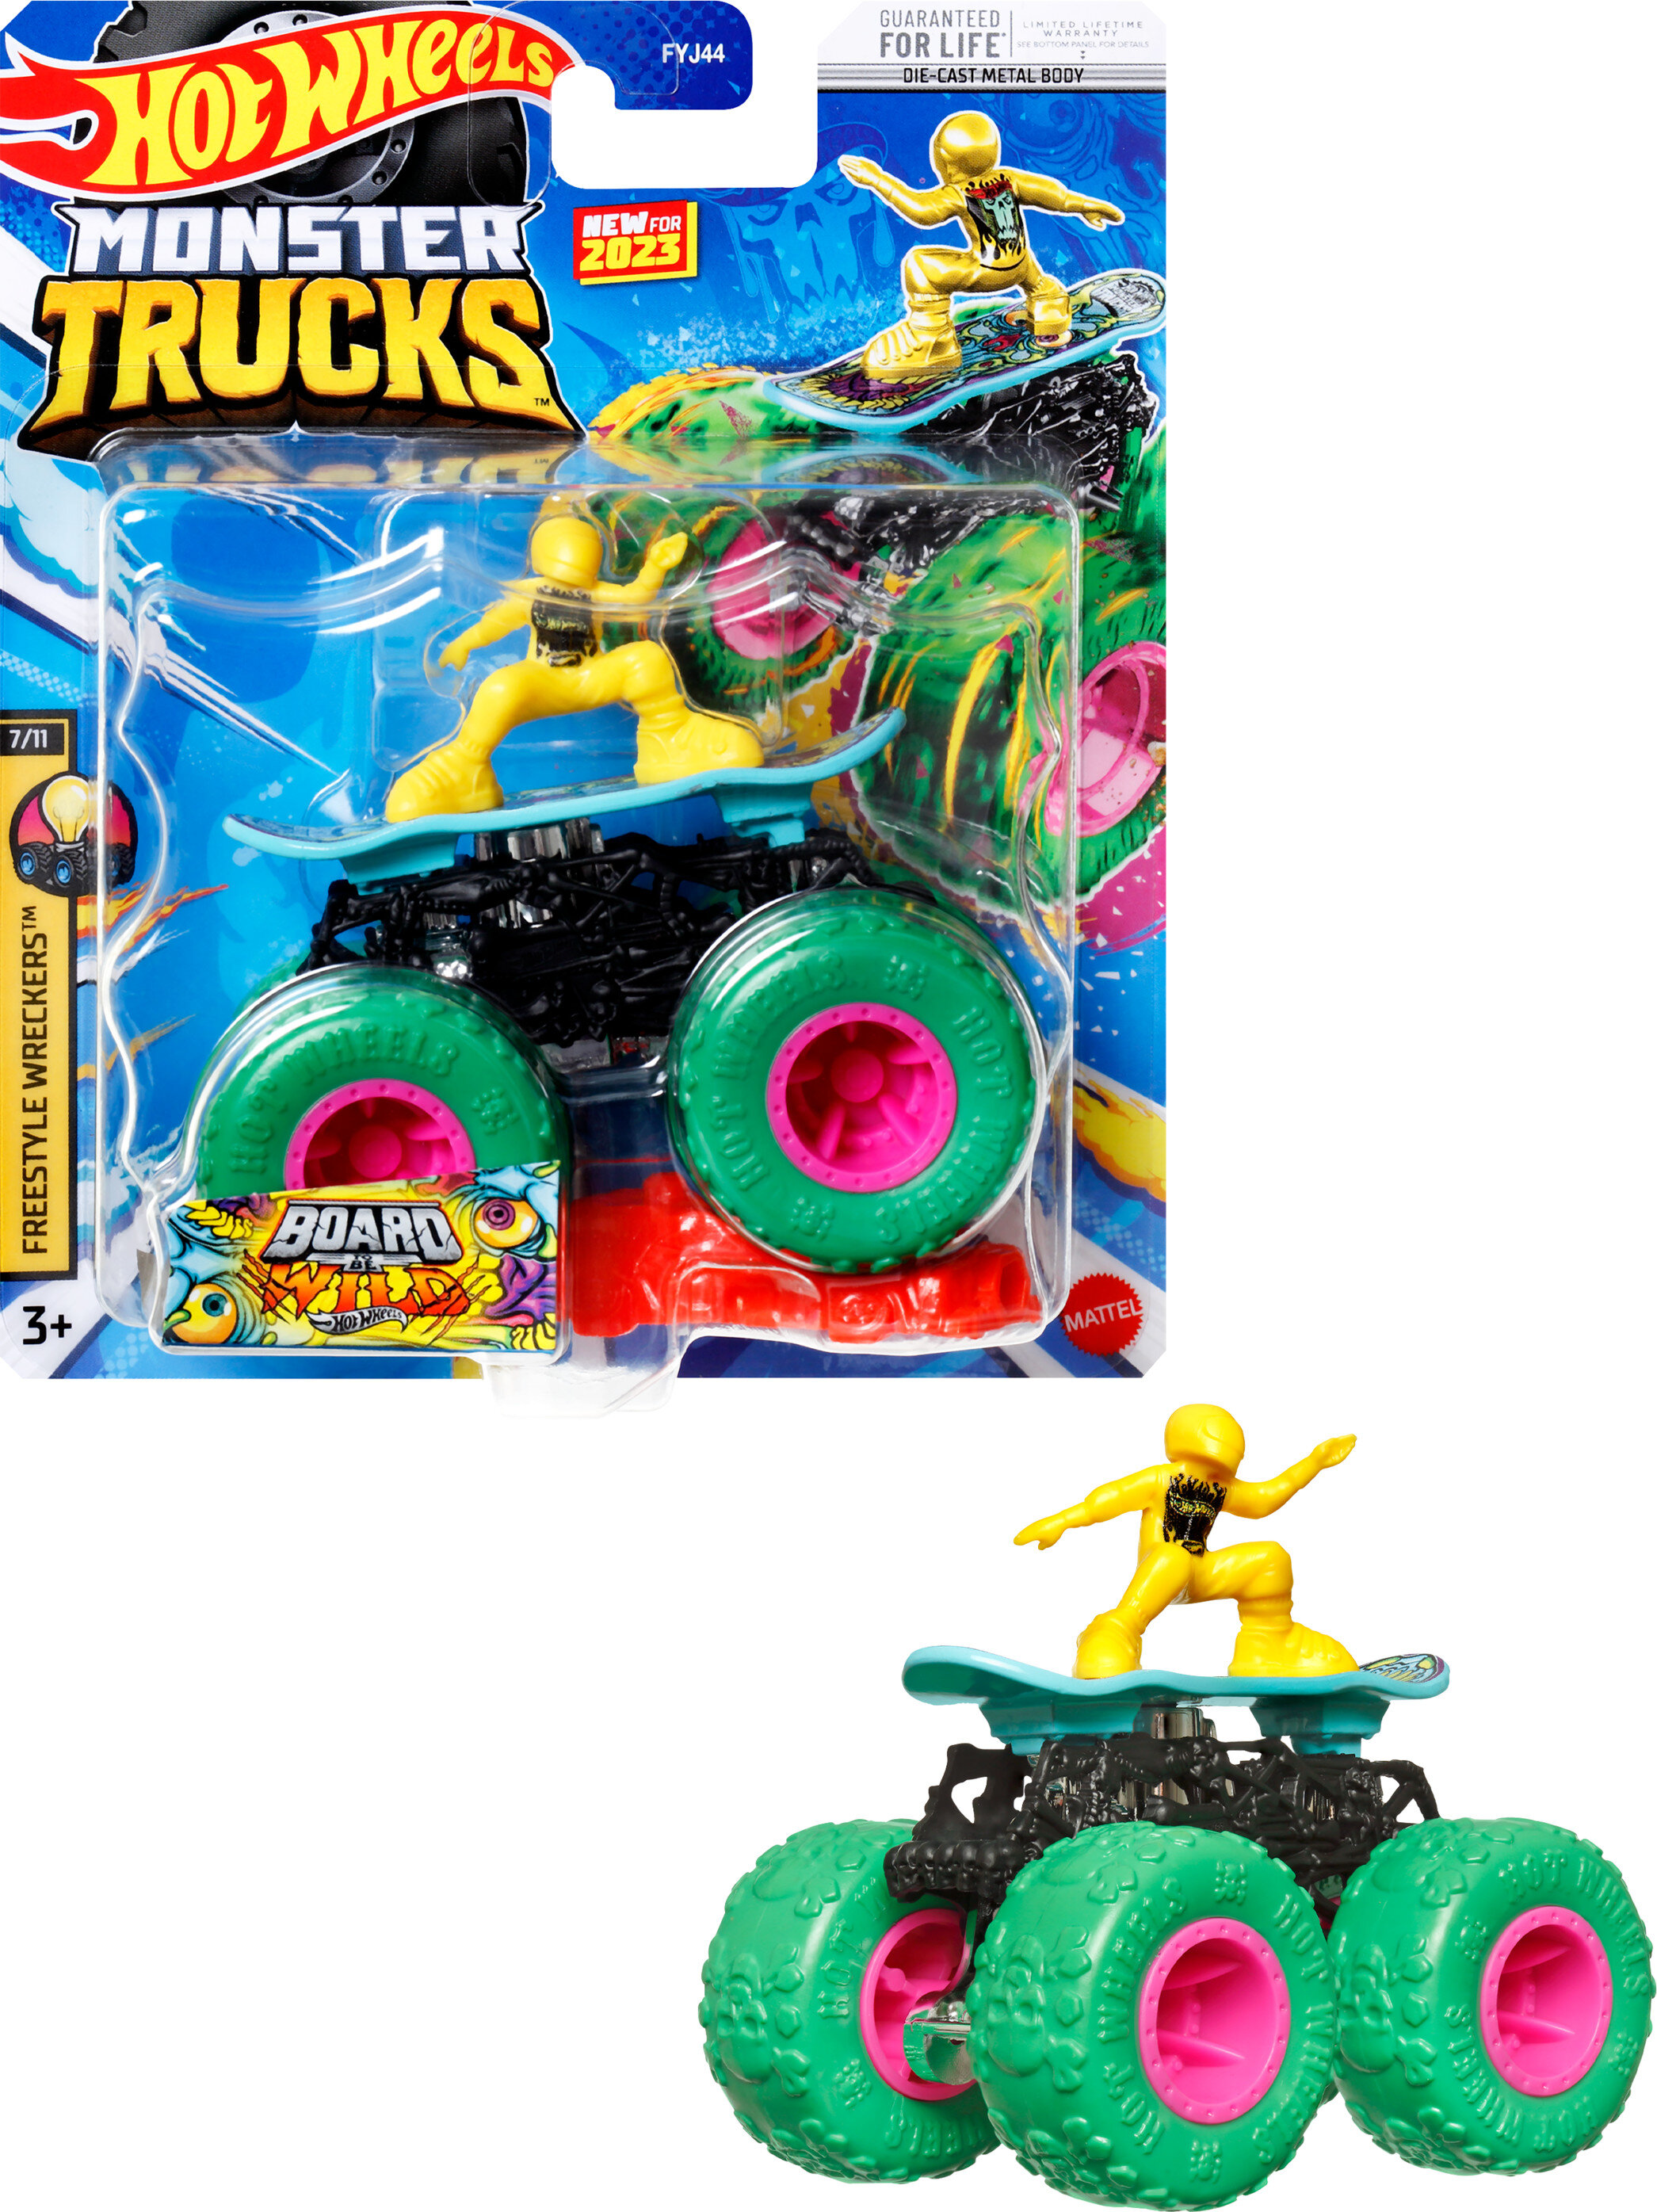 Hot Wheels Monster Trucks, 1:64 Scale Toy Truck & 1 Crushable Car (Styles May Vary) - image 6 of 6